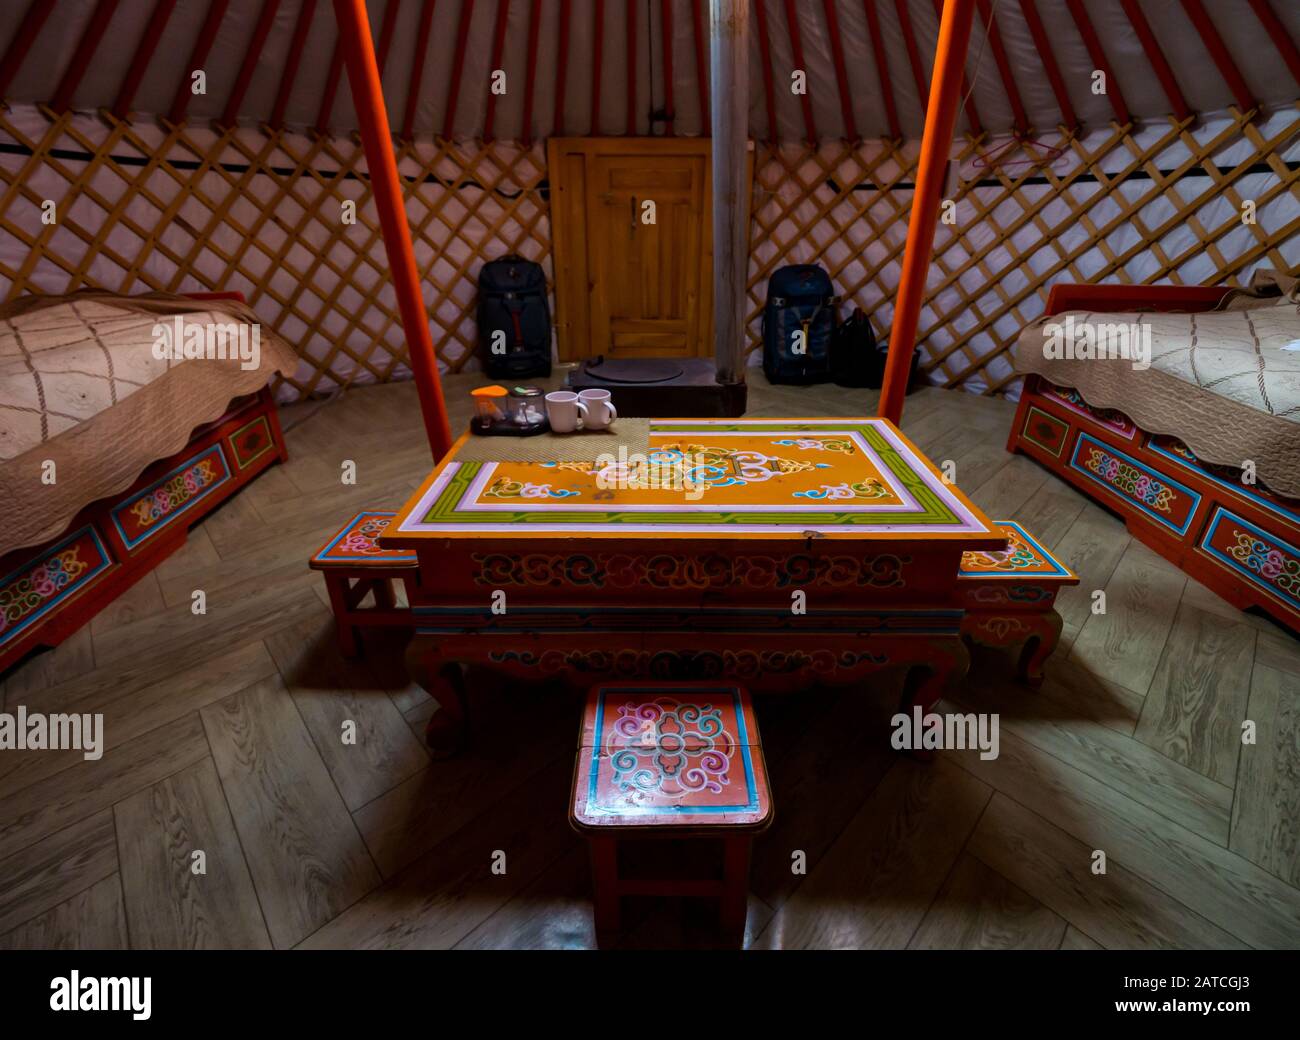 Interior of Mongolian ger or yurt with decorative wooden table & beds, Hustai or Khustain Nuruu National Park, Tov Province, Mongolia, Asia Stock Photo